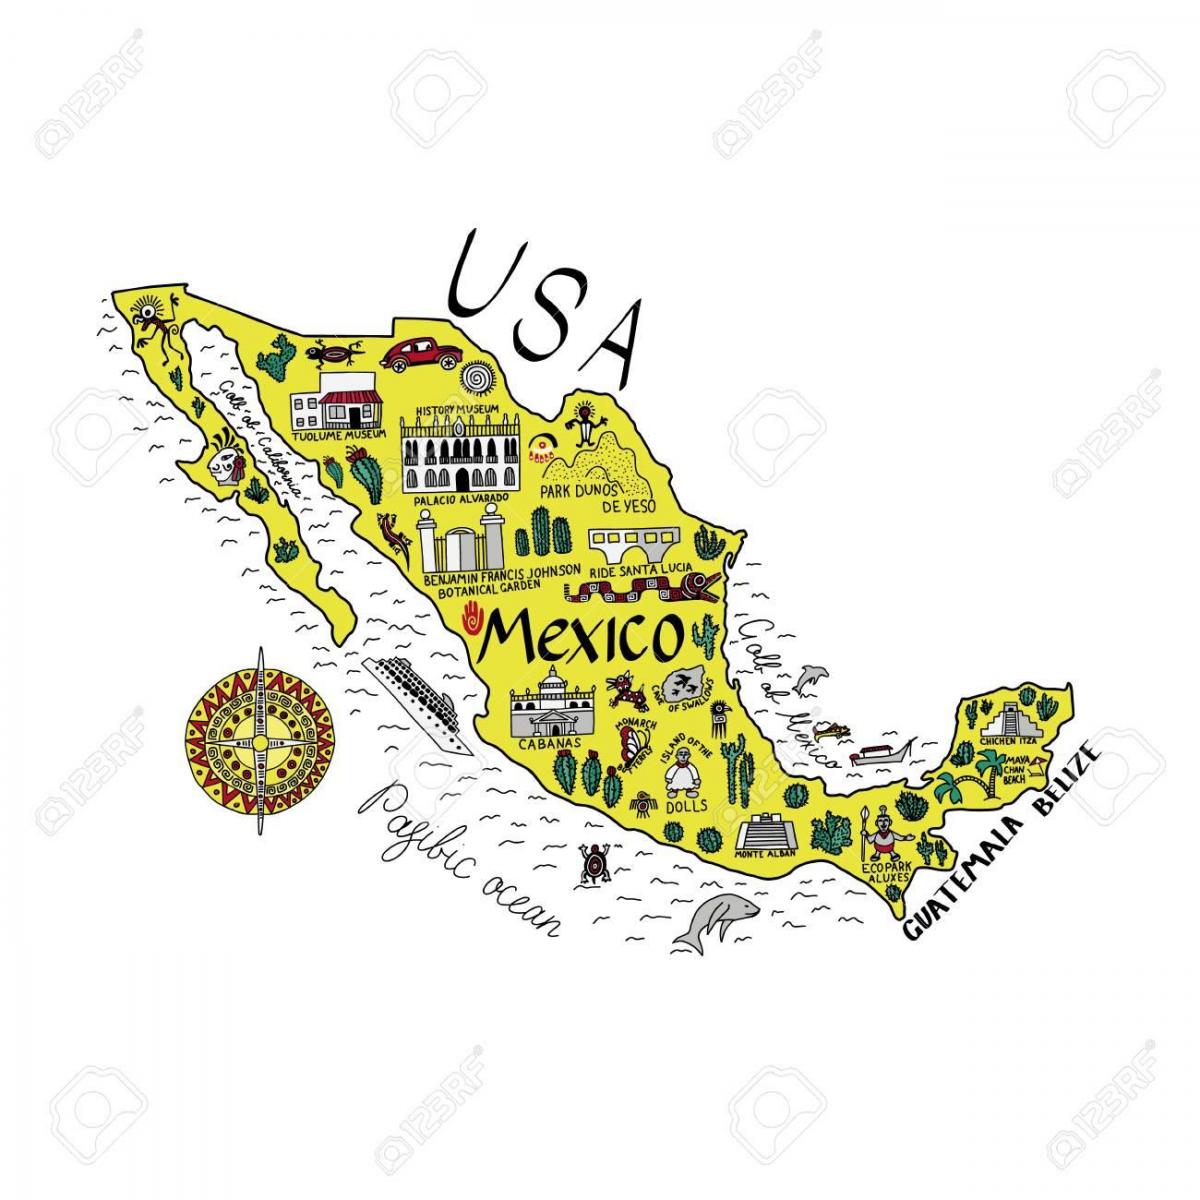 Mexico tourist attractions map